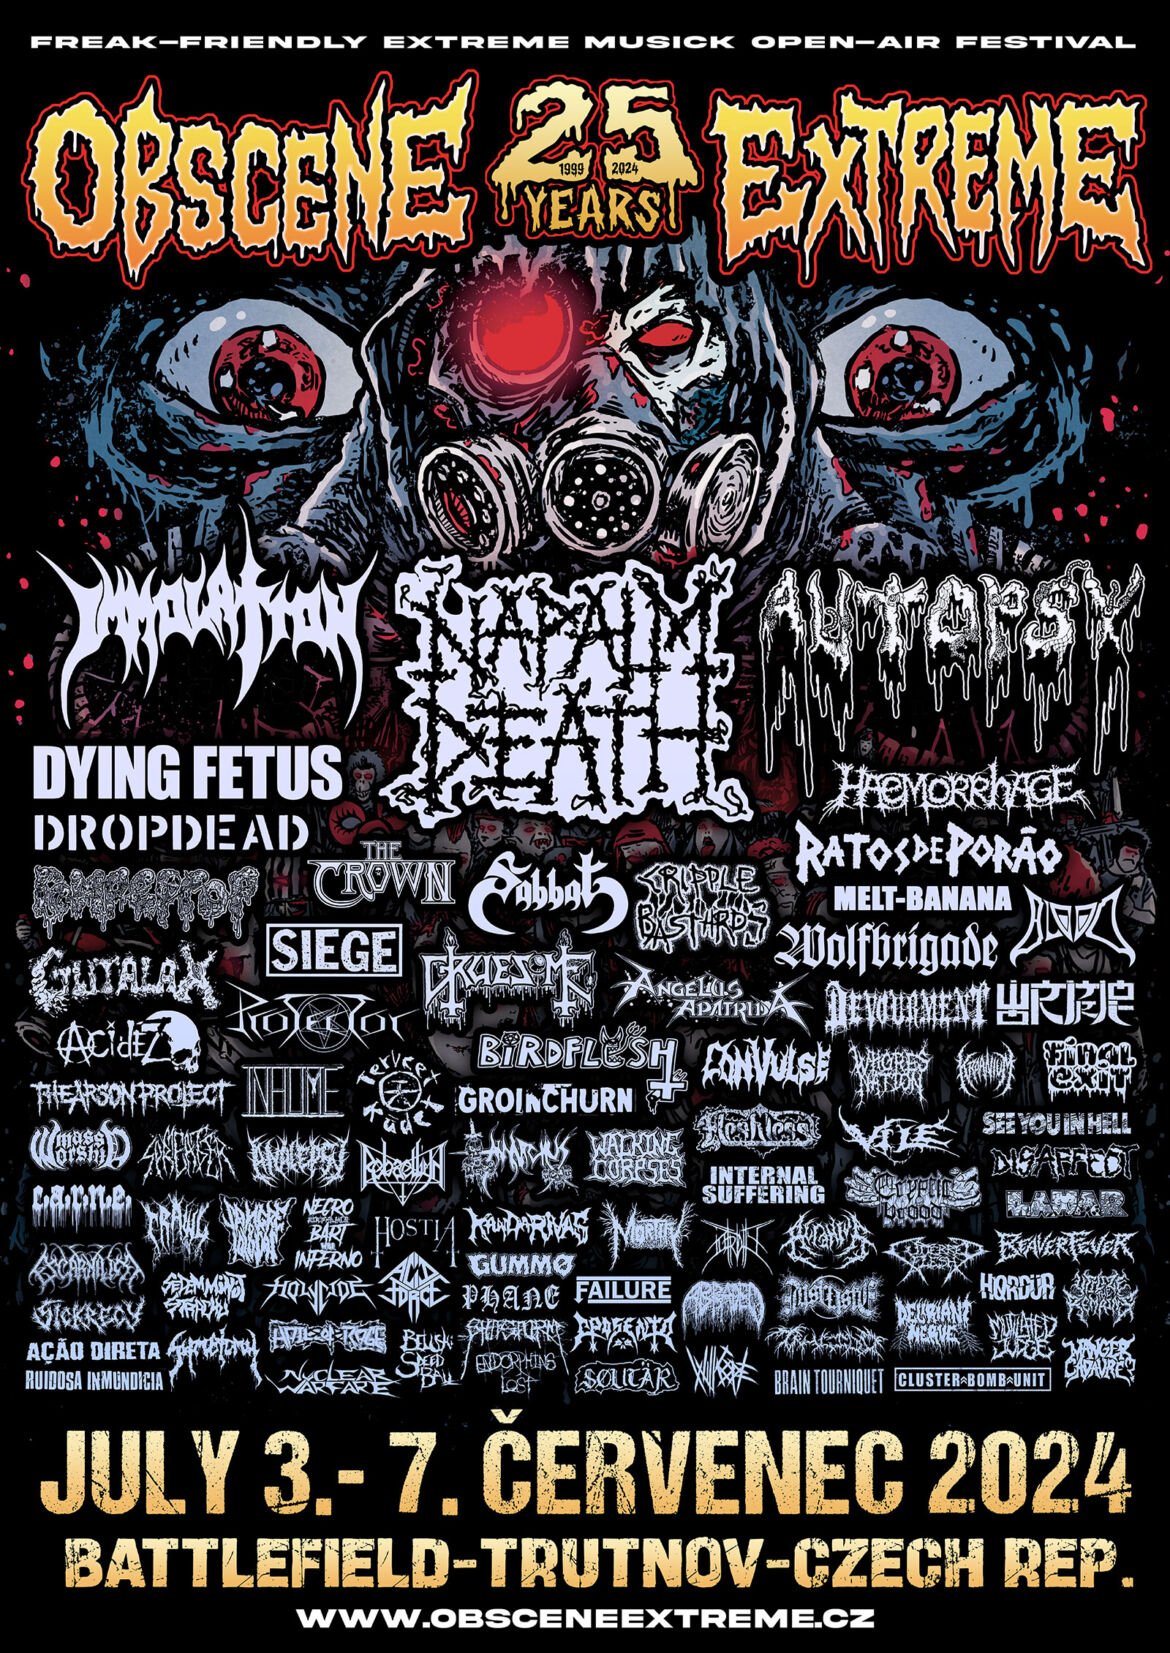 “Play always on maximum” – this is how you get to play on Obscene Extreme Festival in Czech